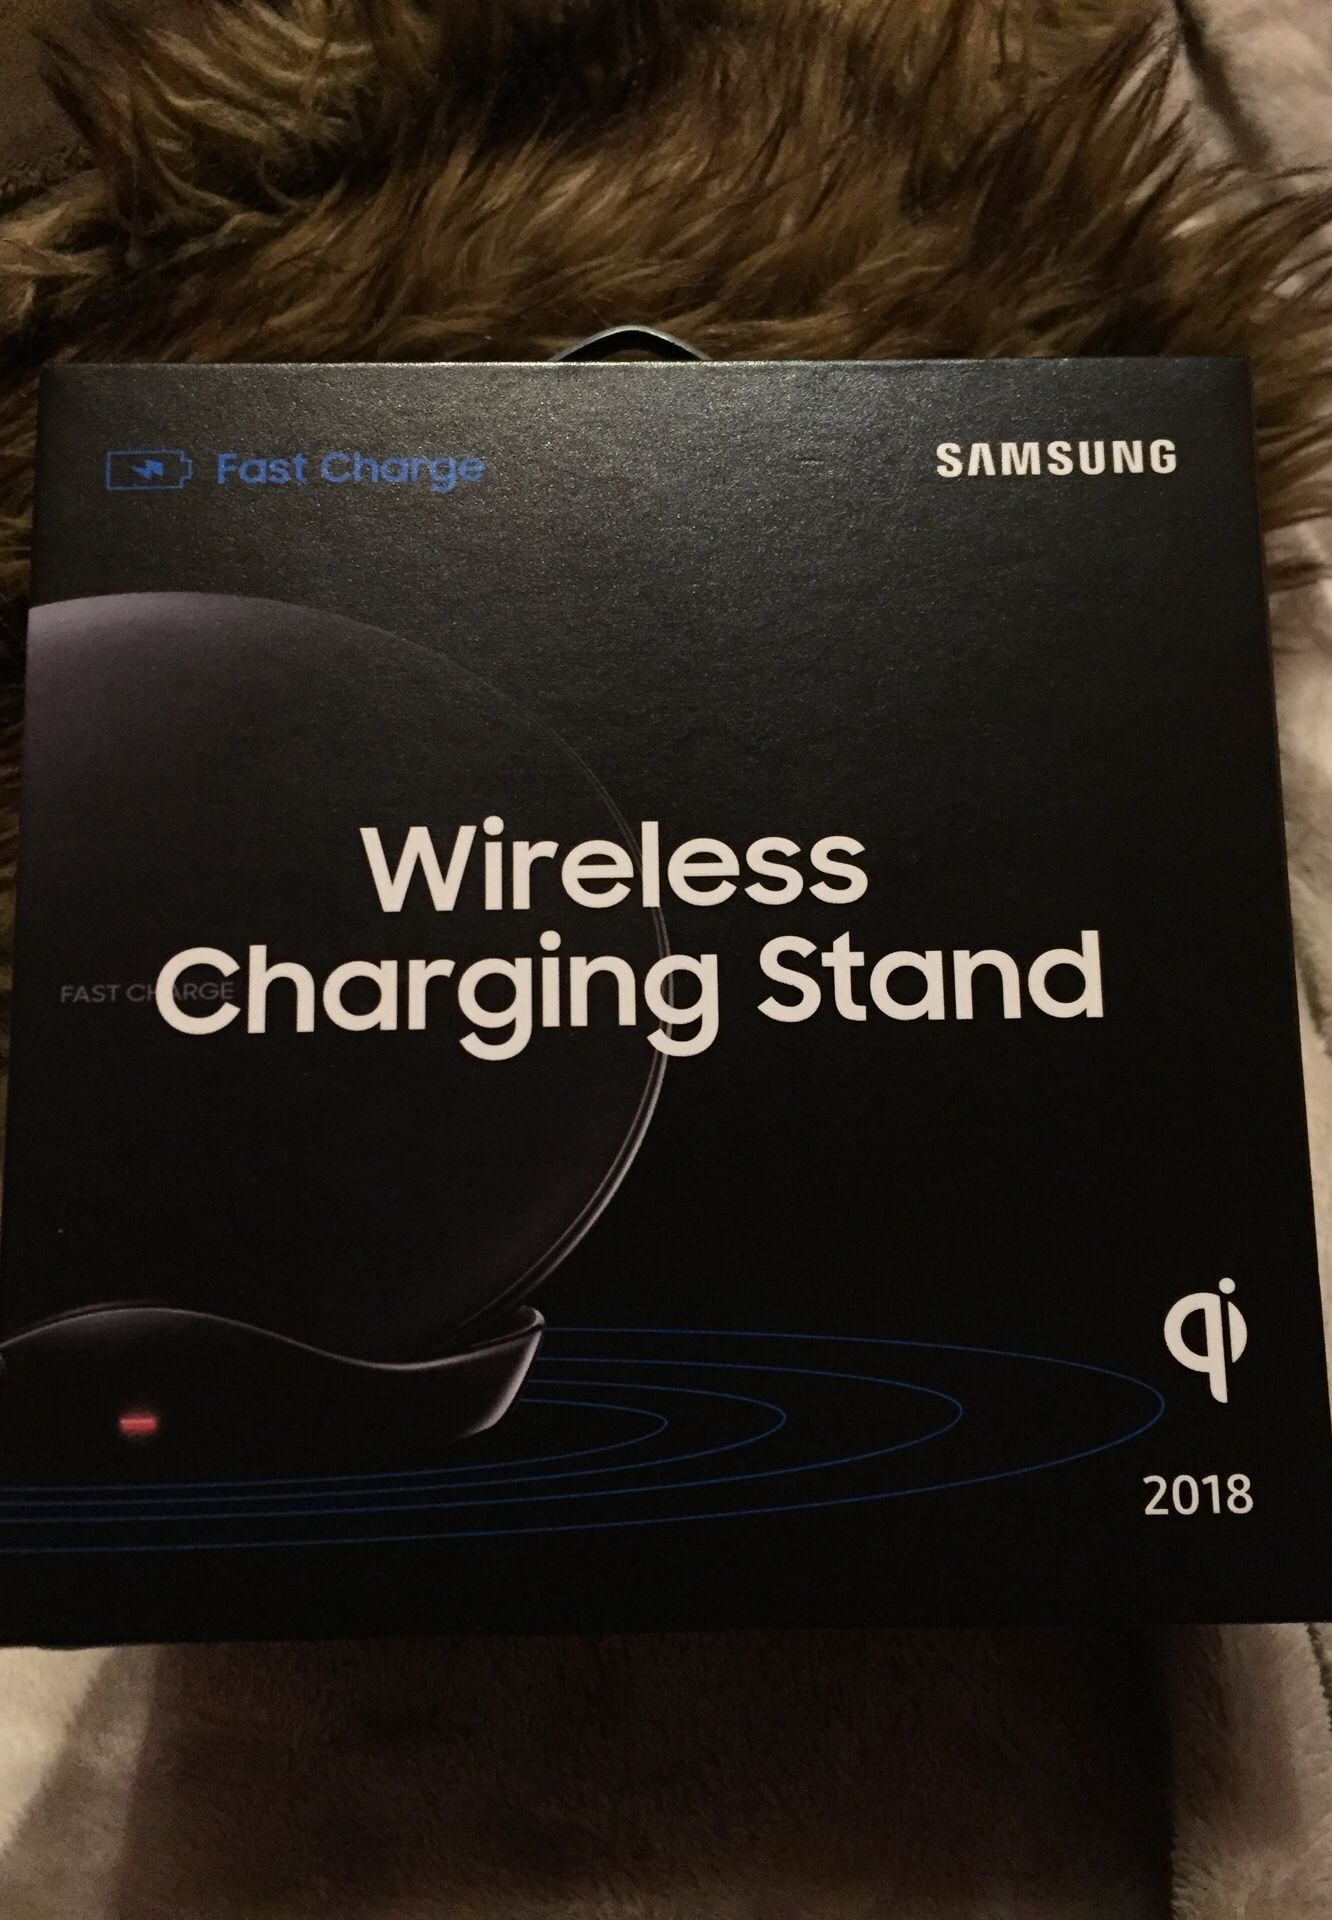 Samsung Wireless Charging Stand new in box $25